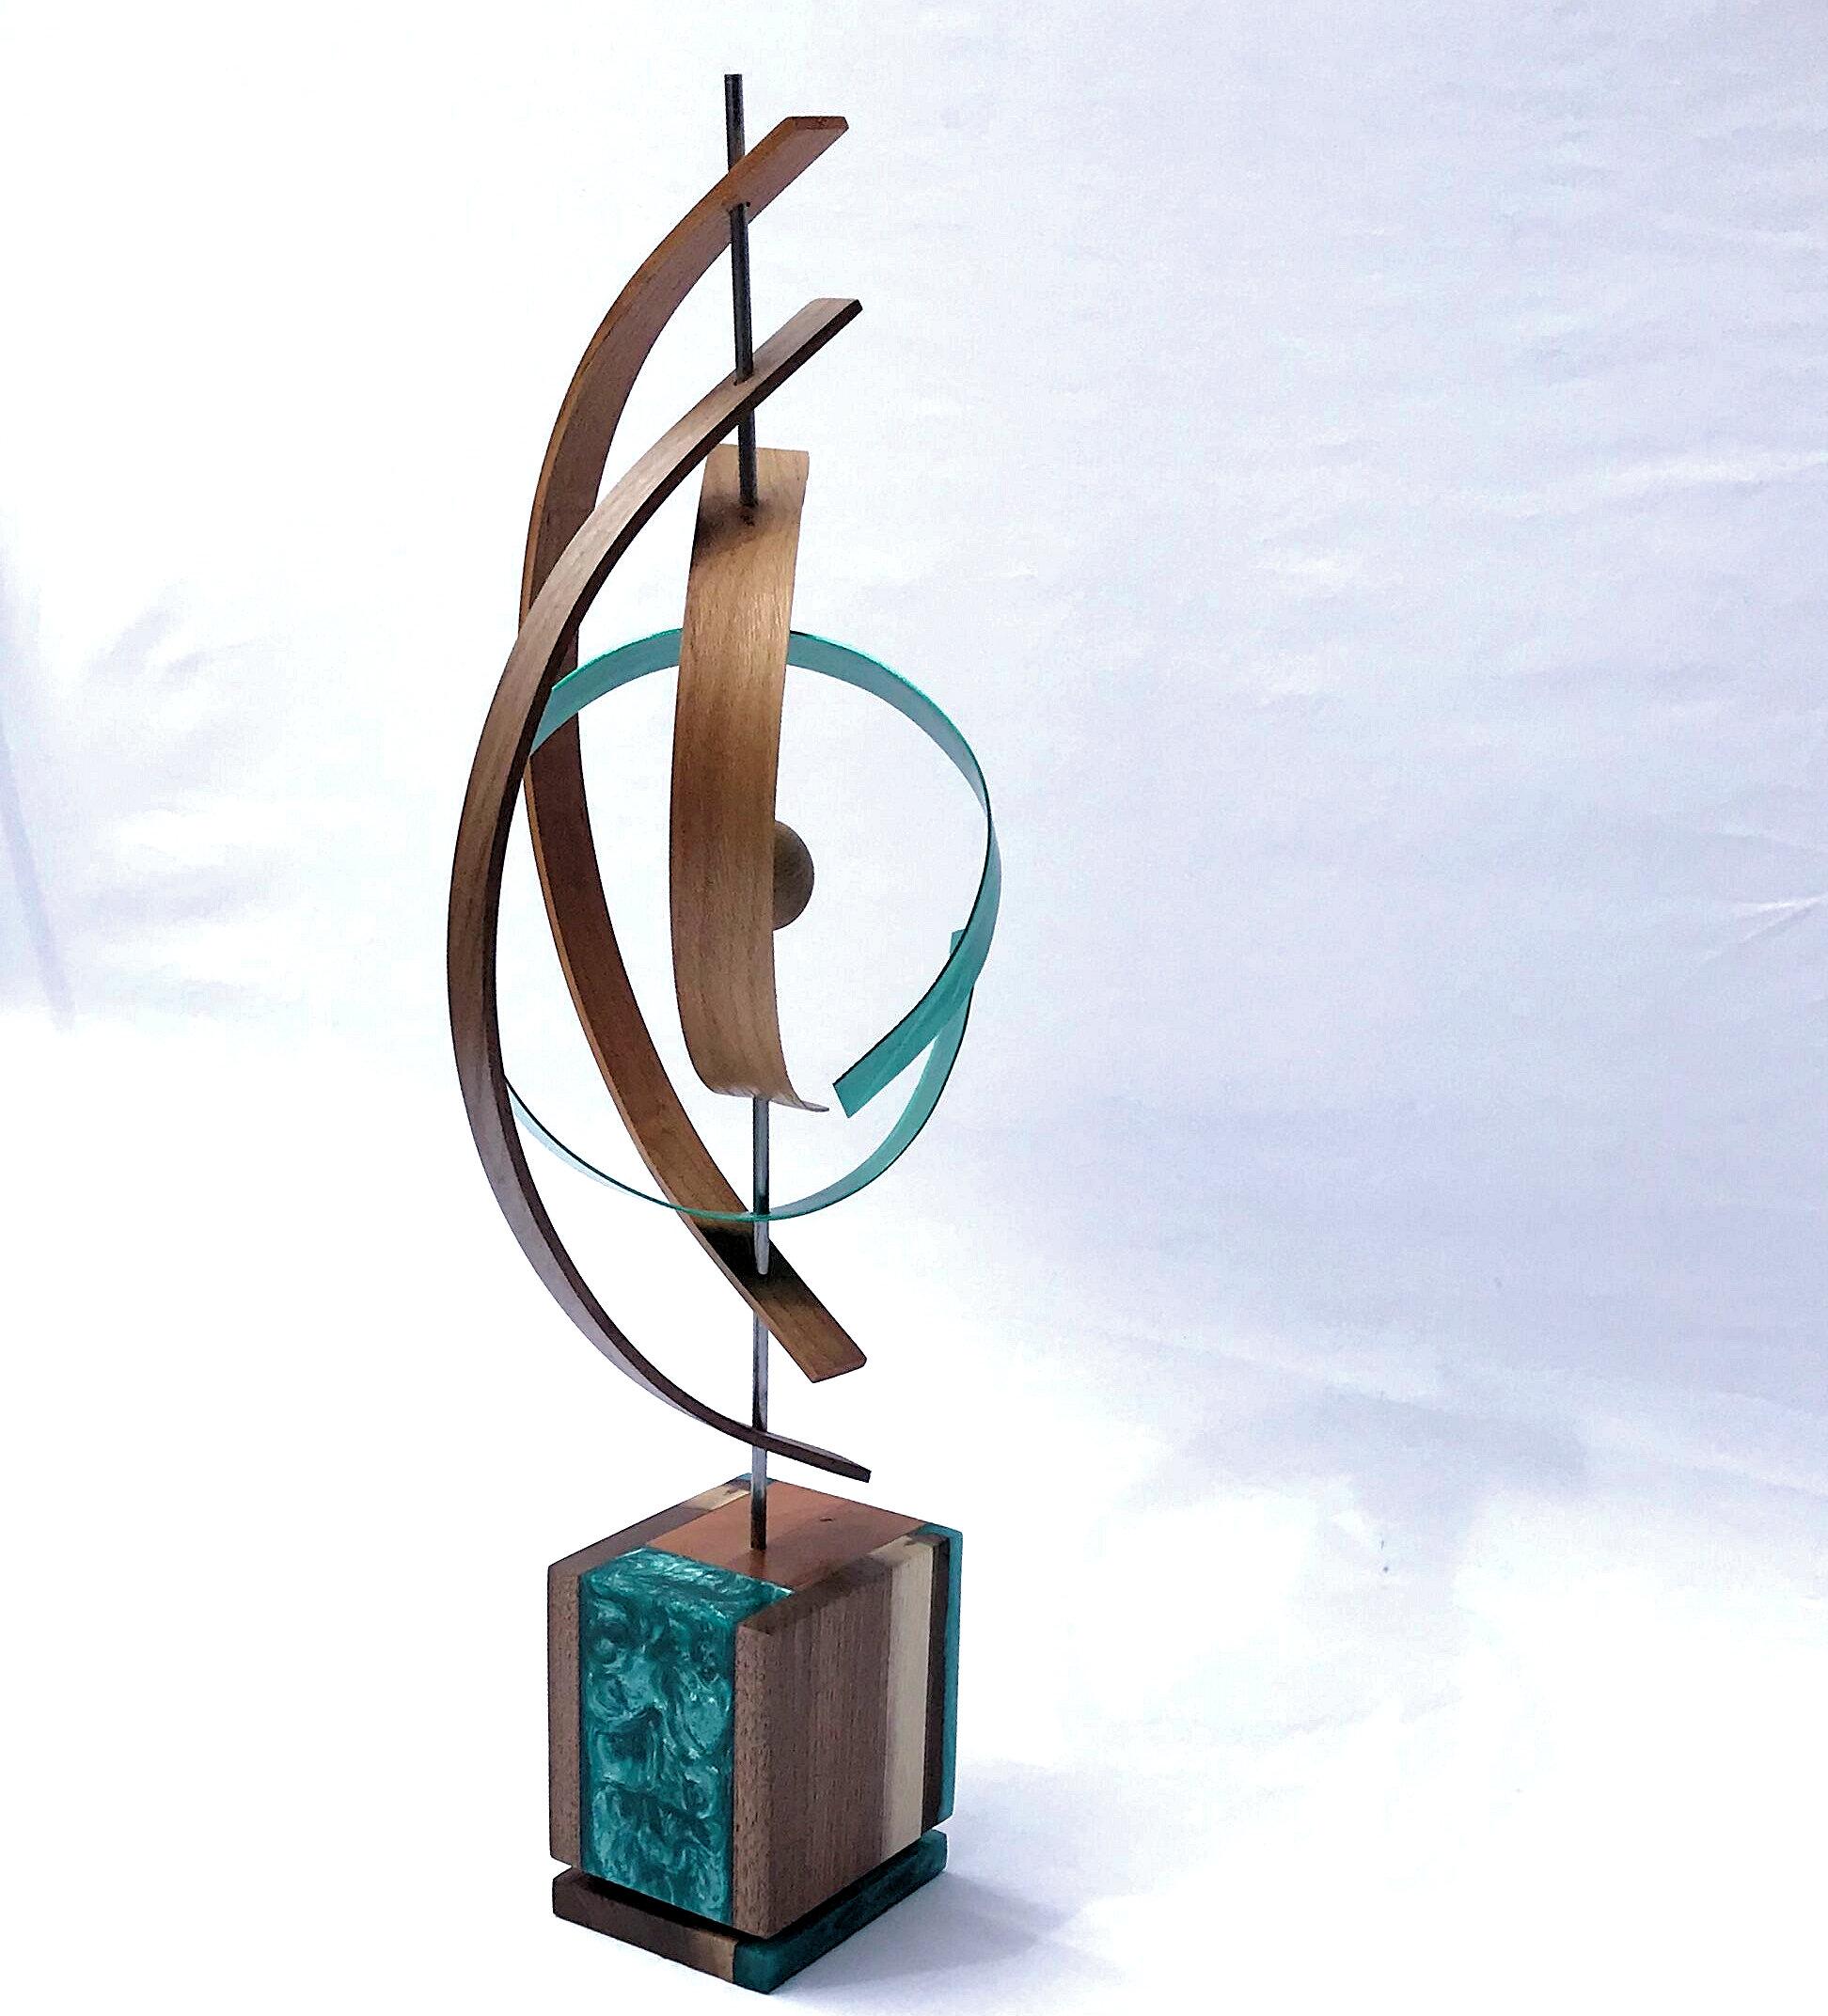 Title: Twister
Description: Formed black walnut and cherry slats twisting with blue/green aluminum slat while suspending a wooden sphere. The complementary base has a semi-gloss finish and features blue/green epoxy inlay with personalized turntable